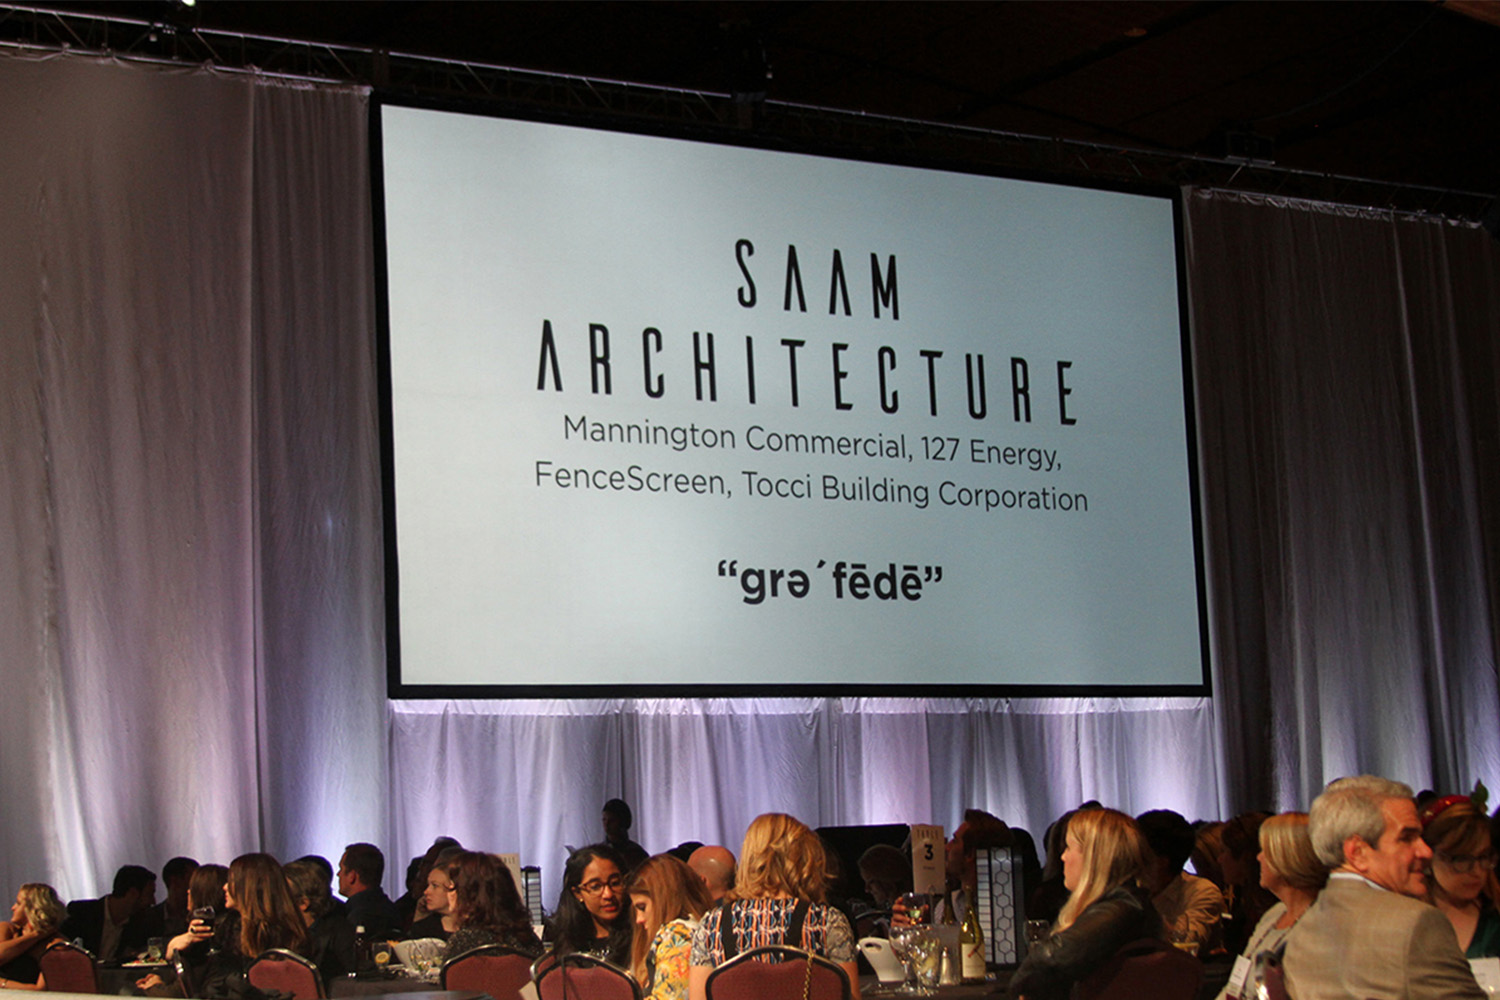 Projecter saying "SAAM Architecture" with corporate participants listed underneath 
